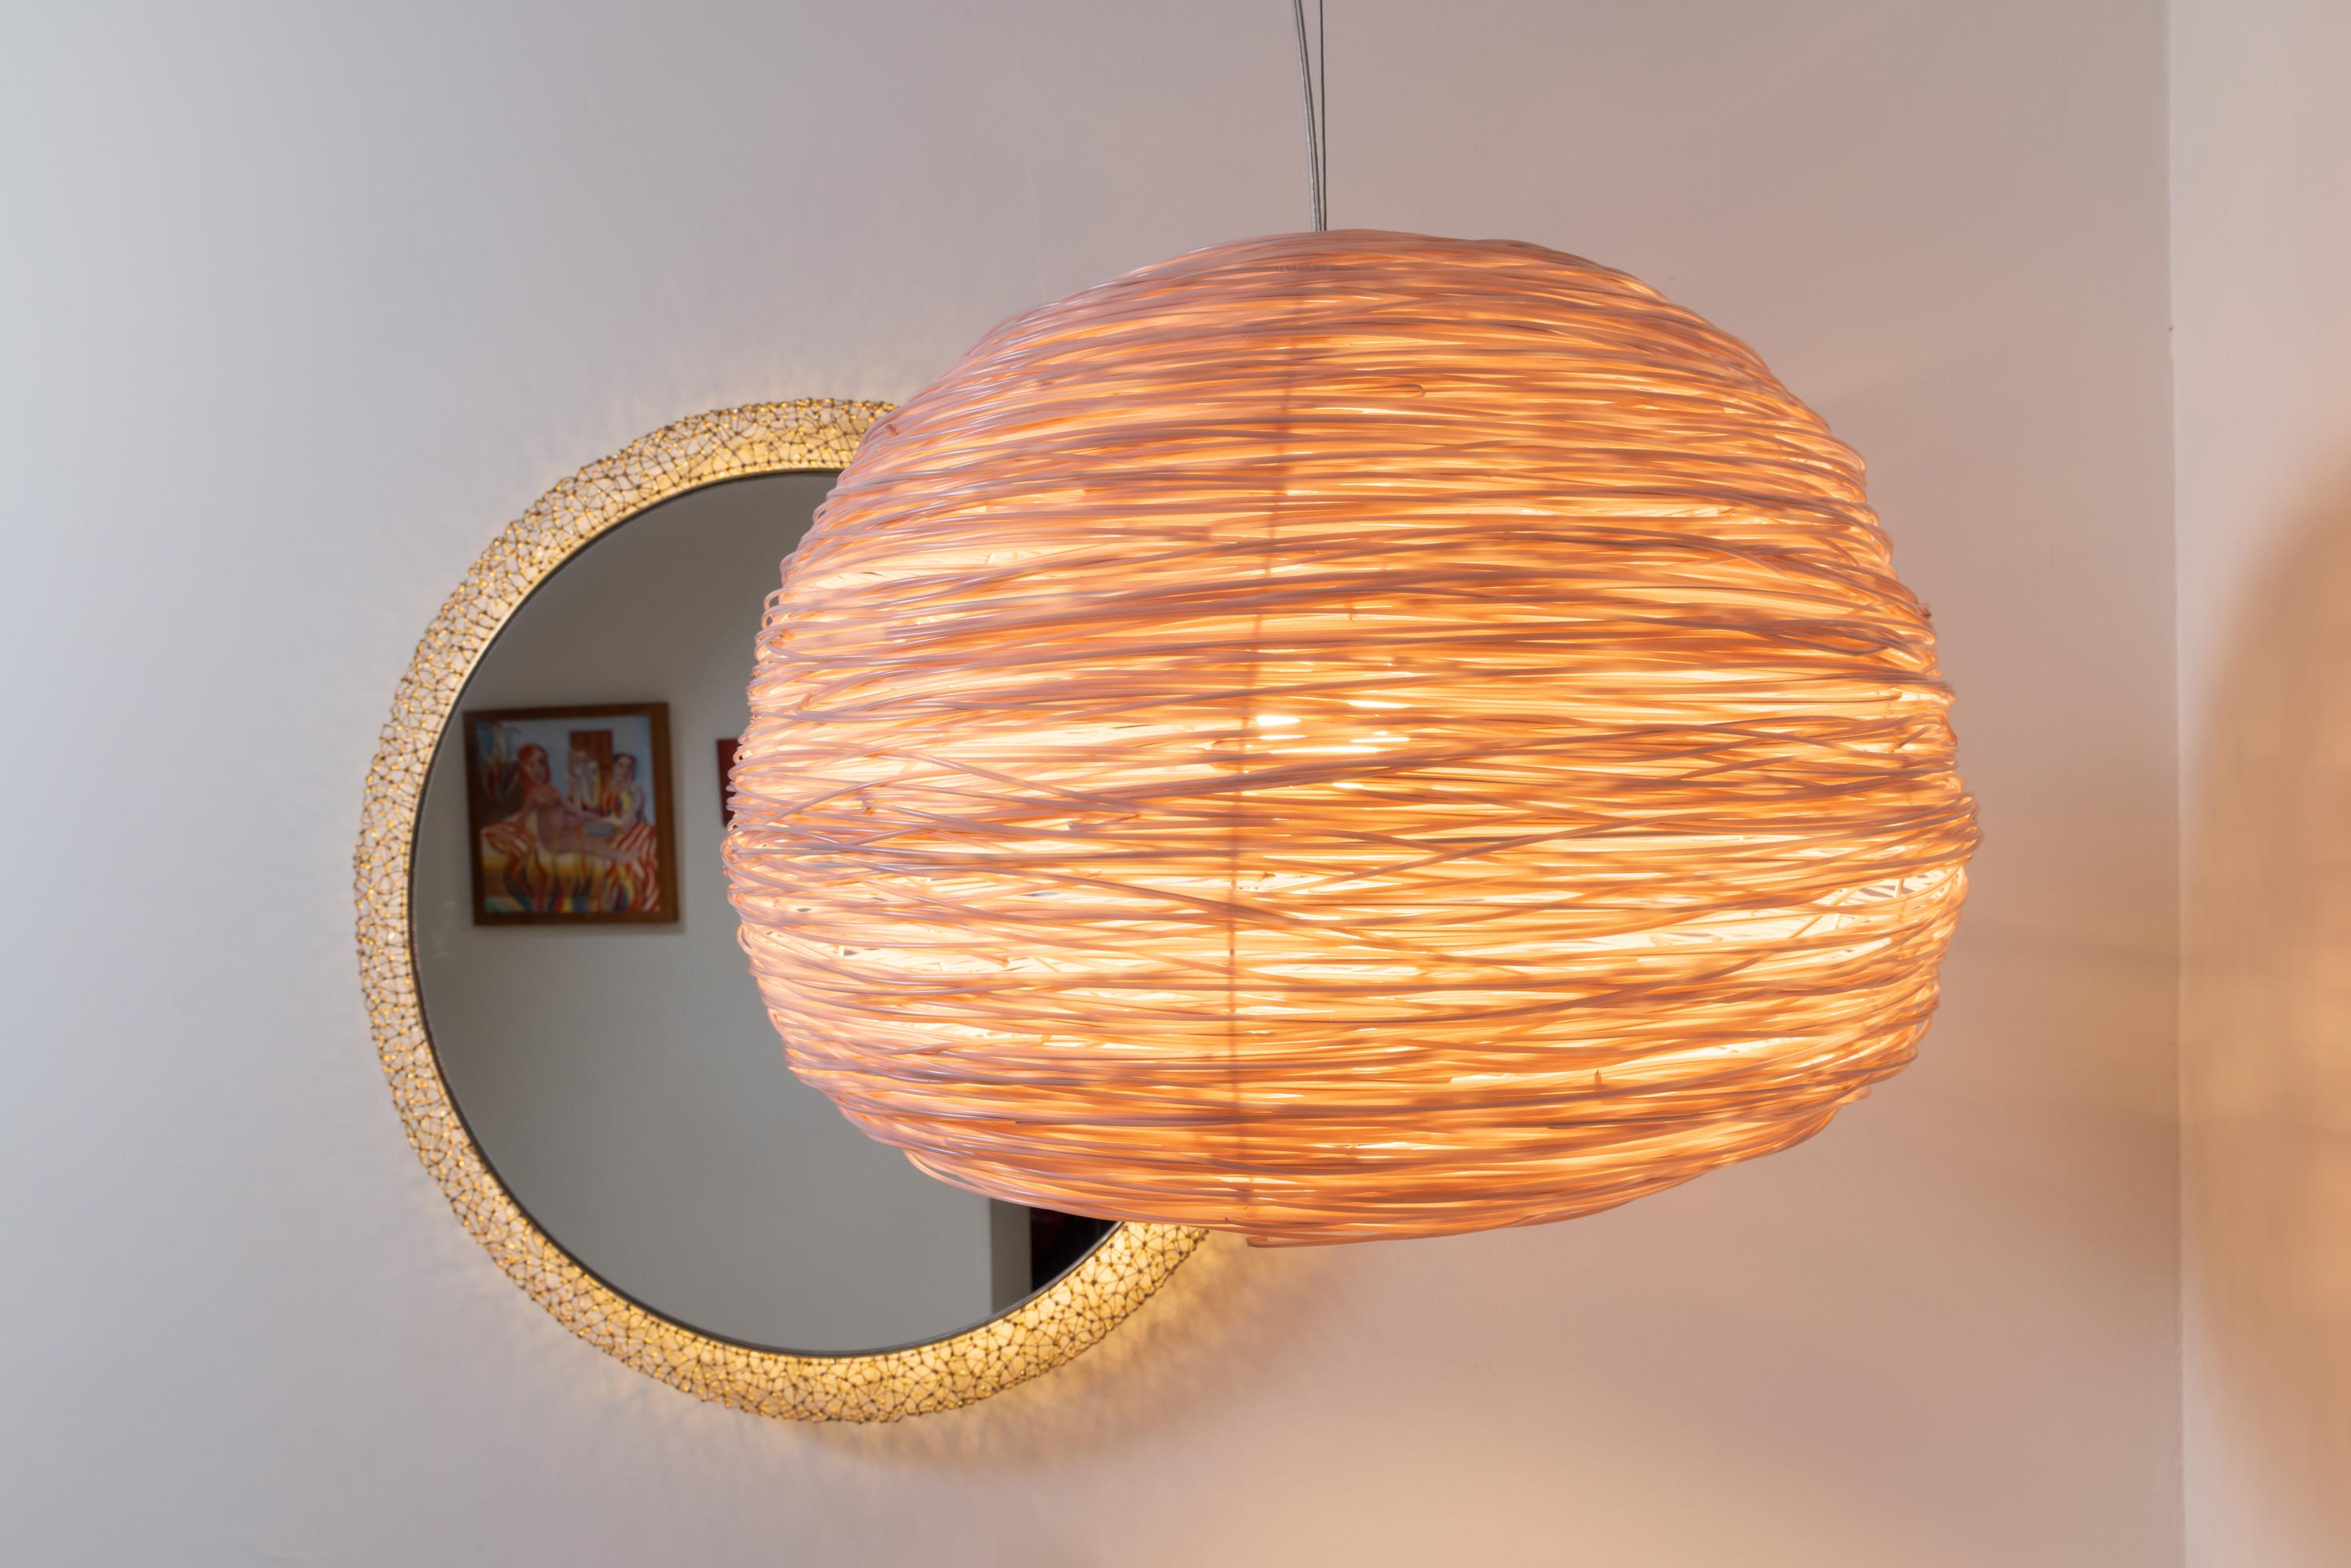 Shelter pendant in Pink is created with the elemental and universal form of a loosely woven nest like home, this is then incarnated by the light inside, which diffuses through many metres of lateral recycled plastic waste material 

The Shelter